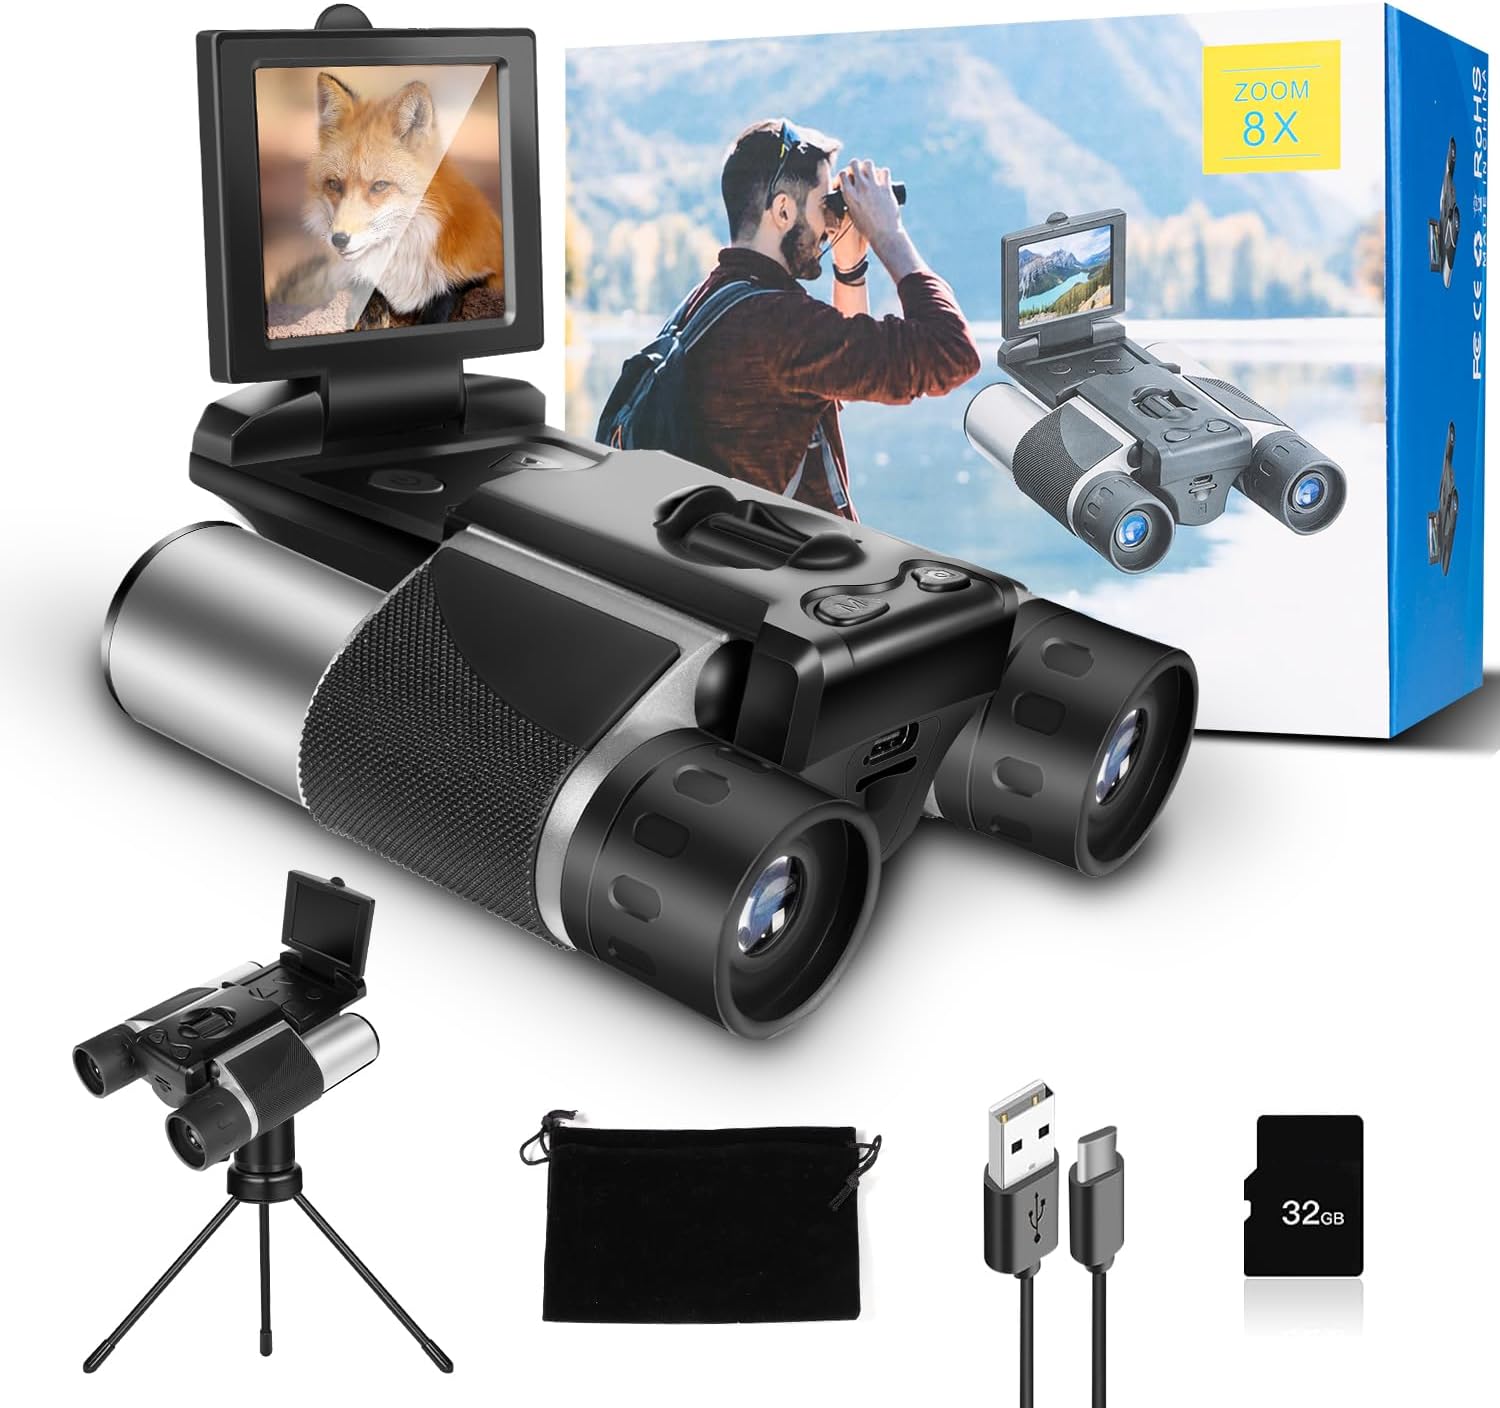 Digital Binocular with Camera 10x Optical Zoom 8X Digital Zoom, 2 LCD Display 40MP Camera 2.5K Videos Ideal for Concerts, Bird Watching, and Outdoor Adventures with 32GB SD Card